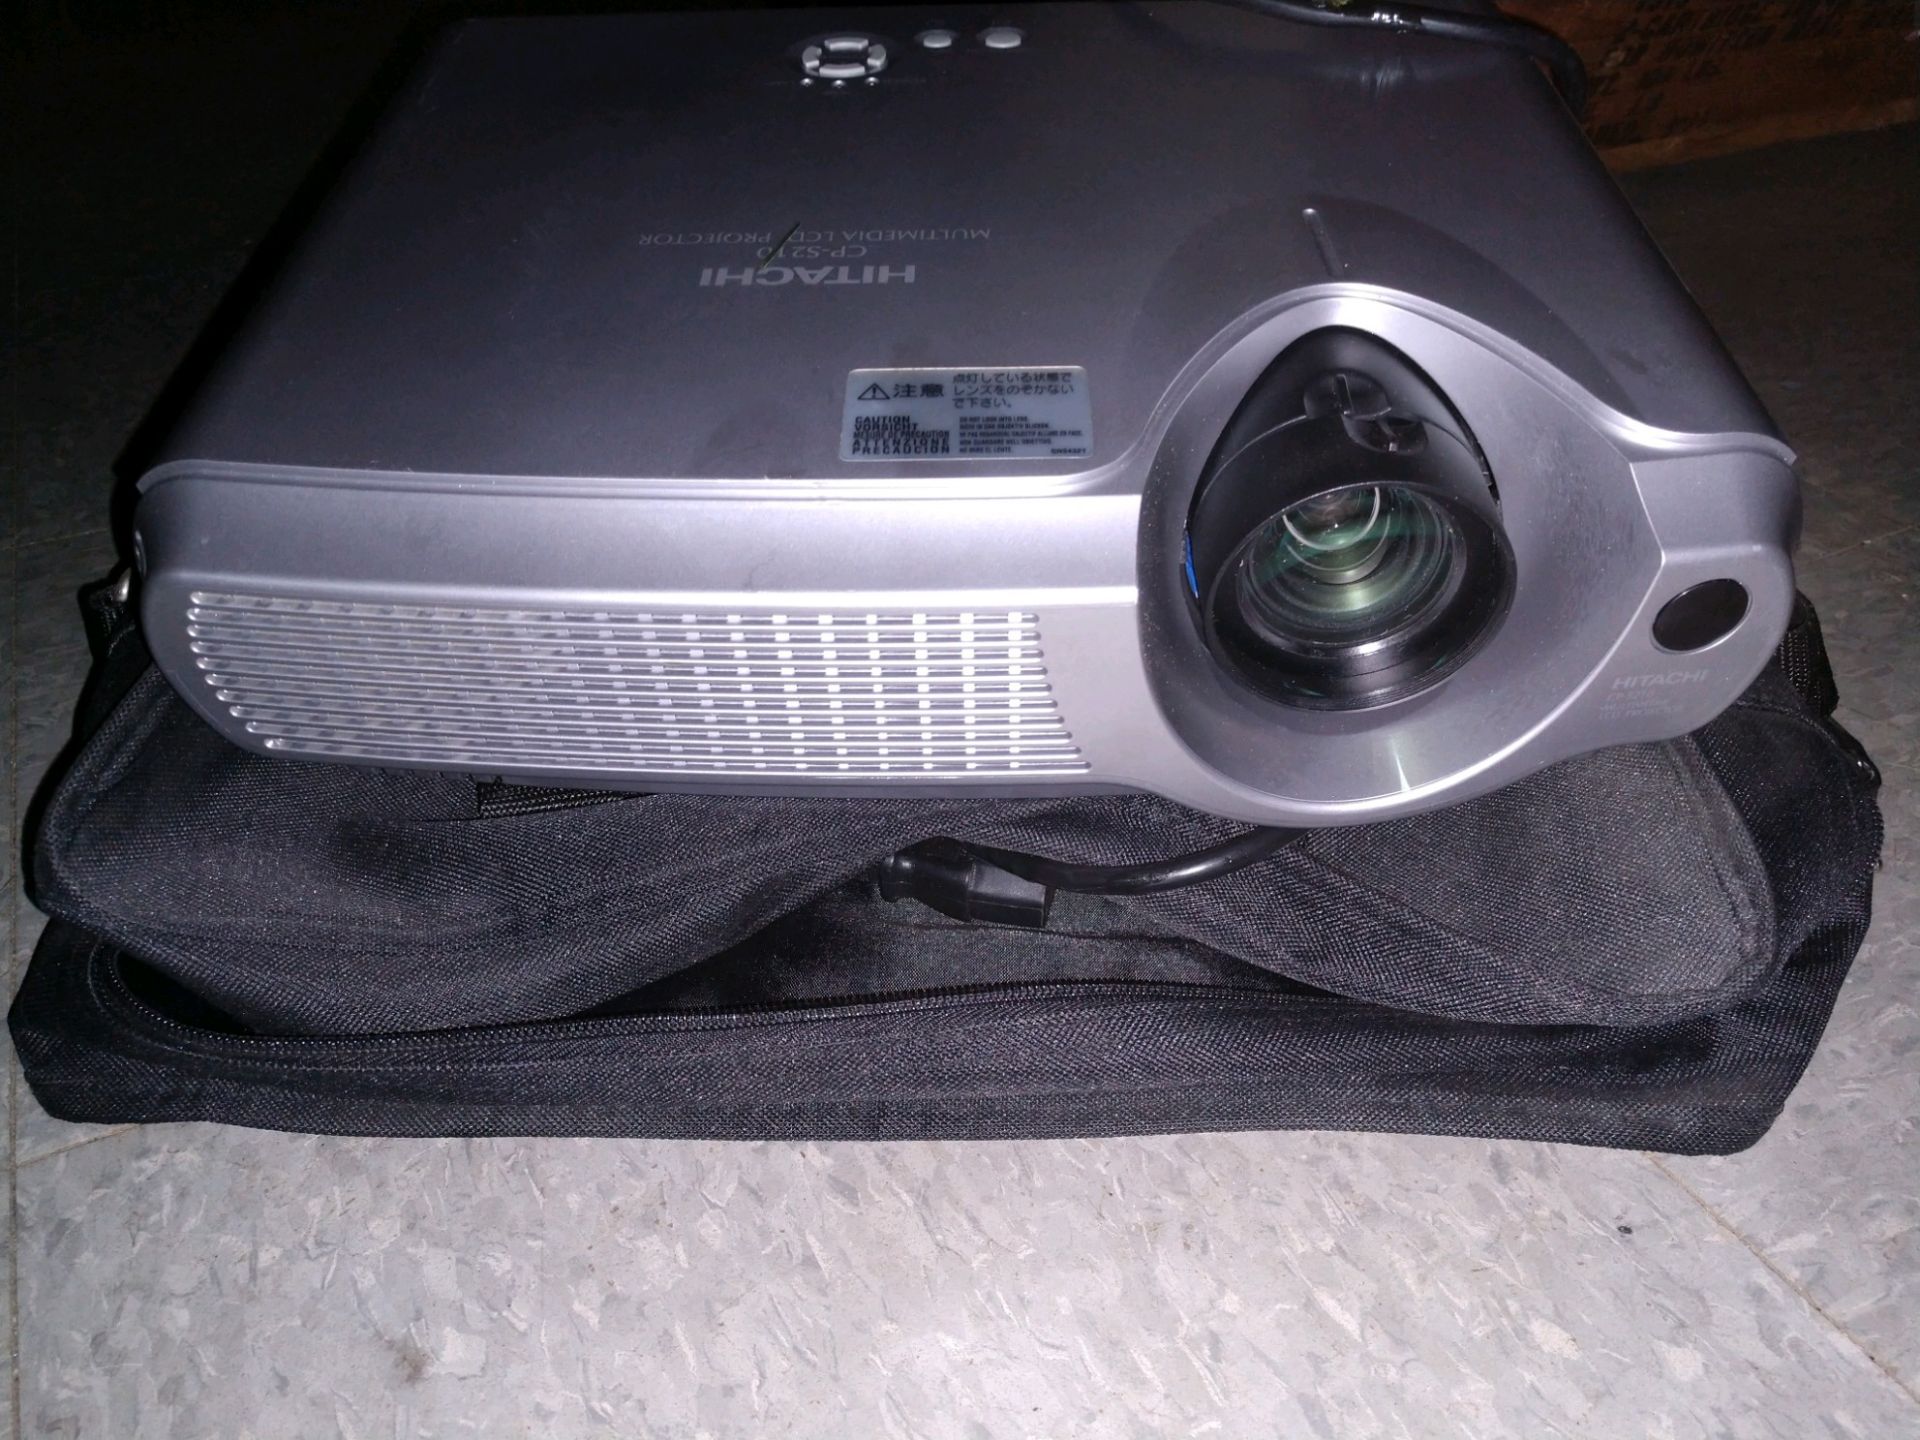 A/V Projector in Carry Case